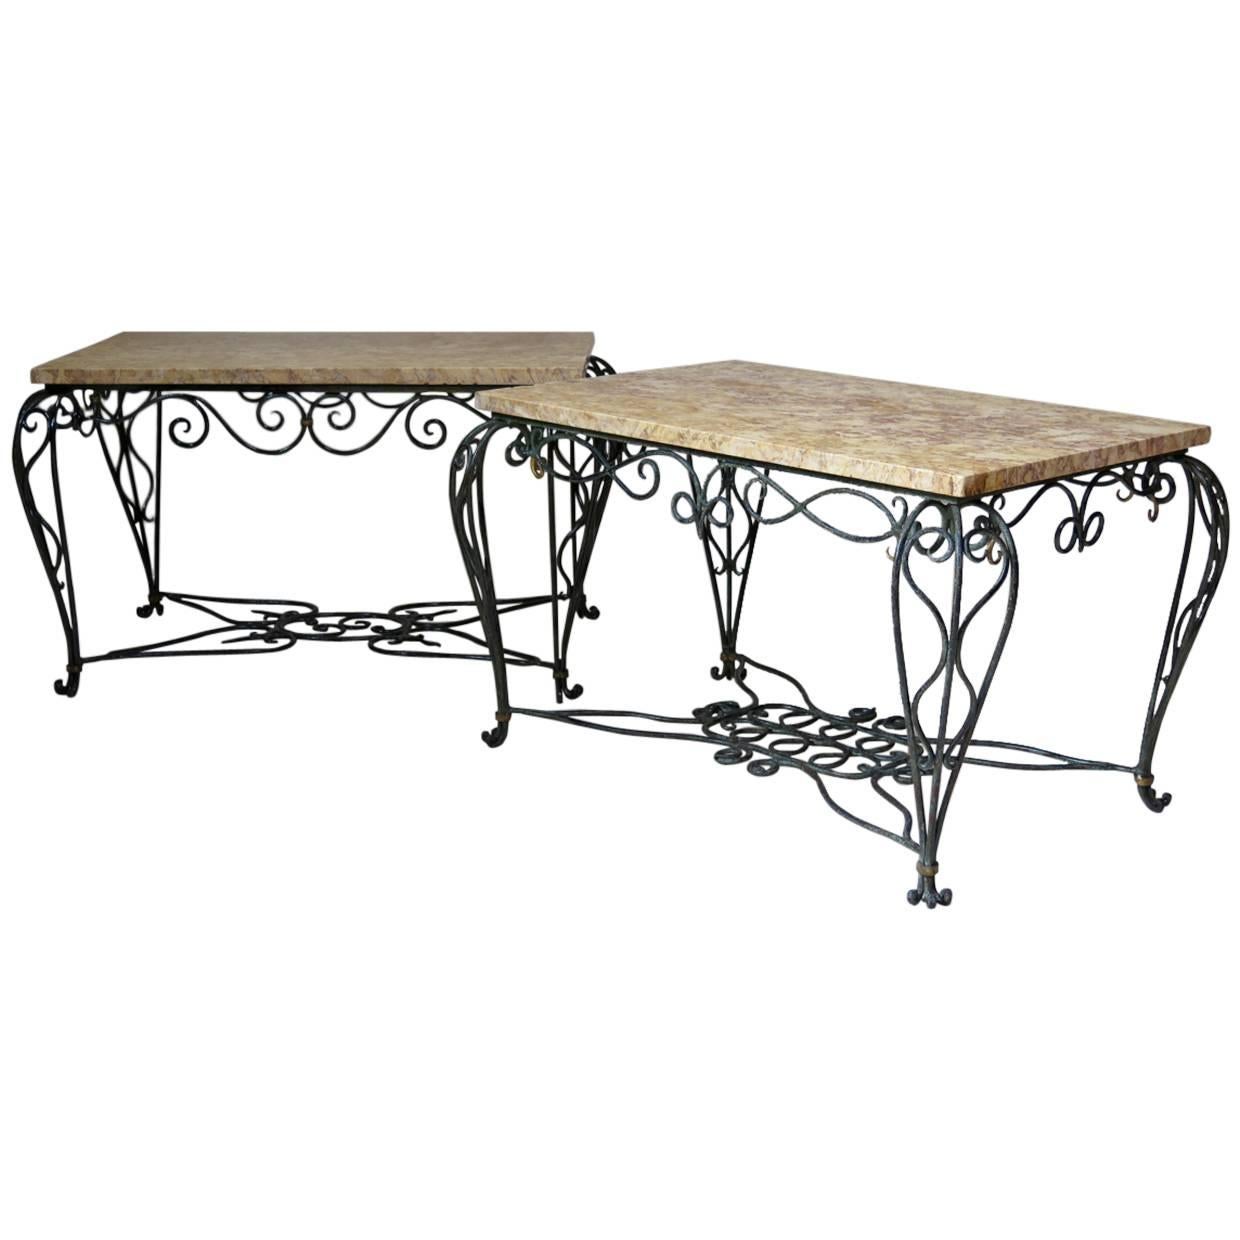 Chic French 1940s Iron and Marble Side Table (2 Available)